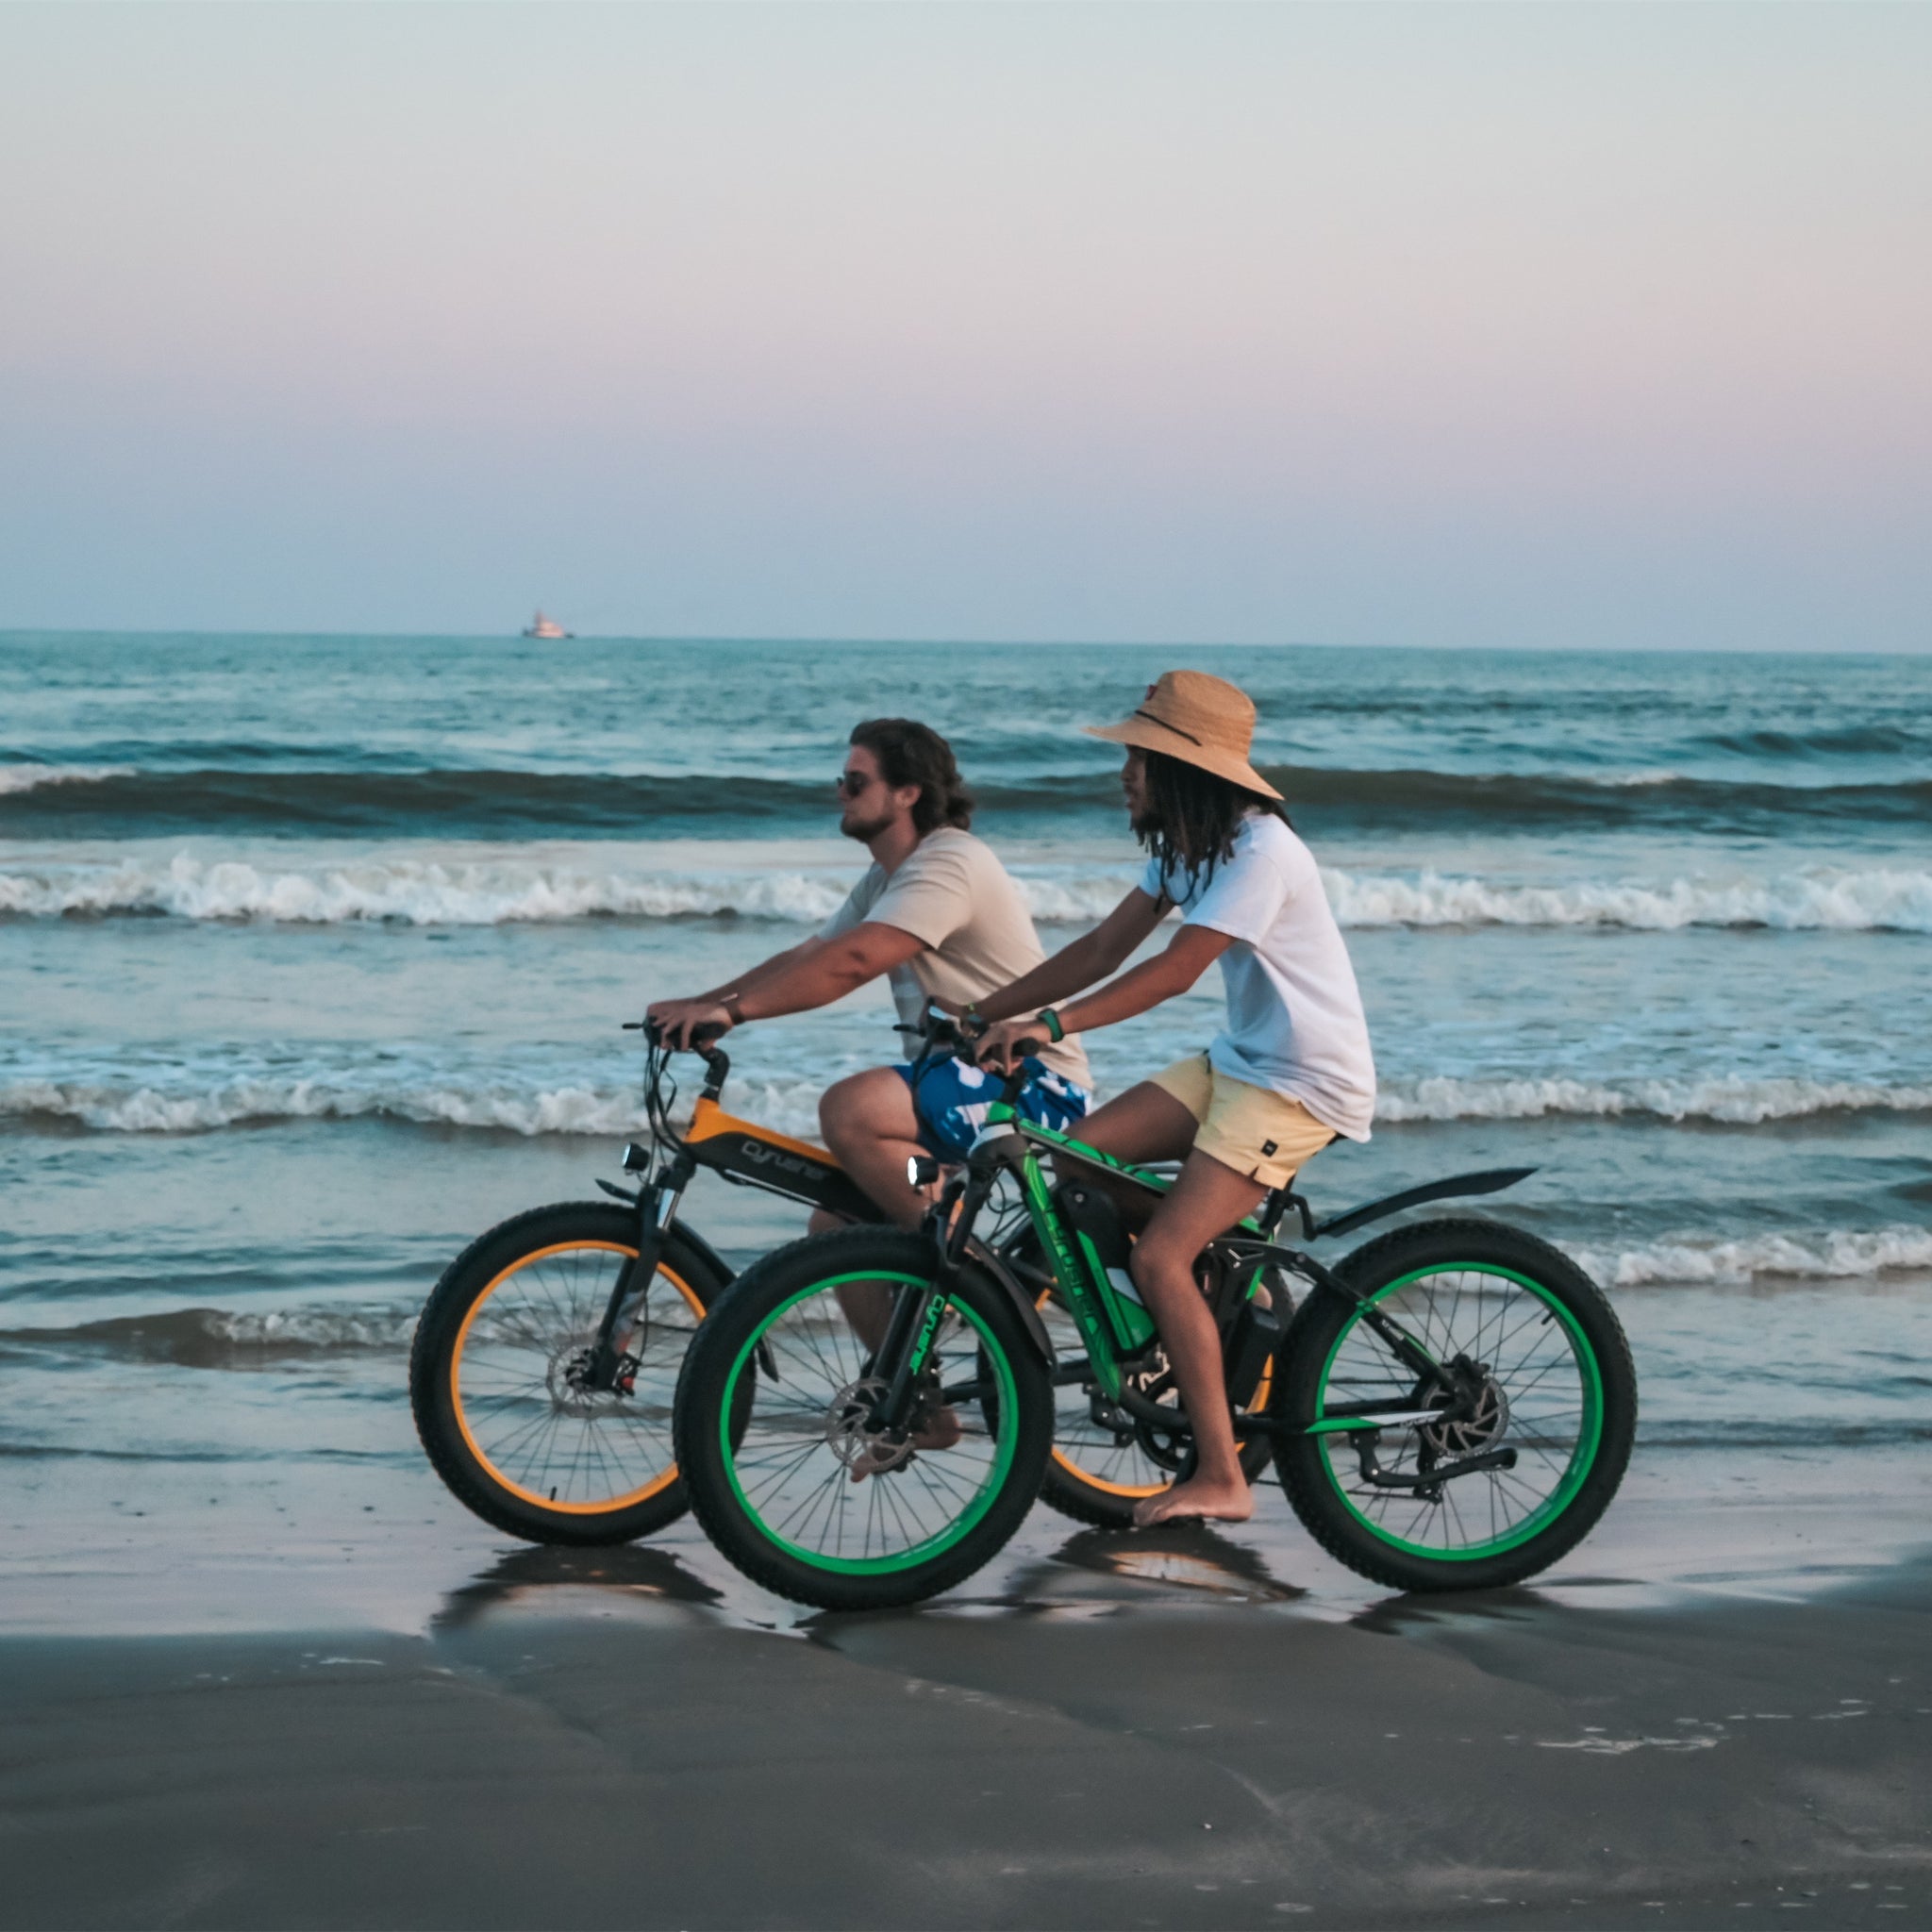 Two man riding Cyrusher ebike on the beach